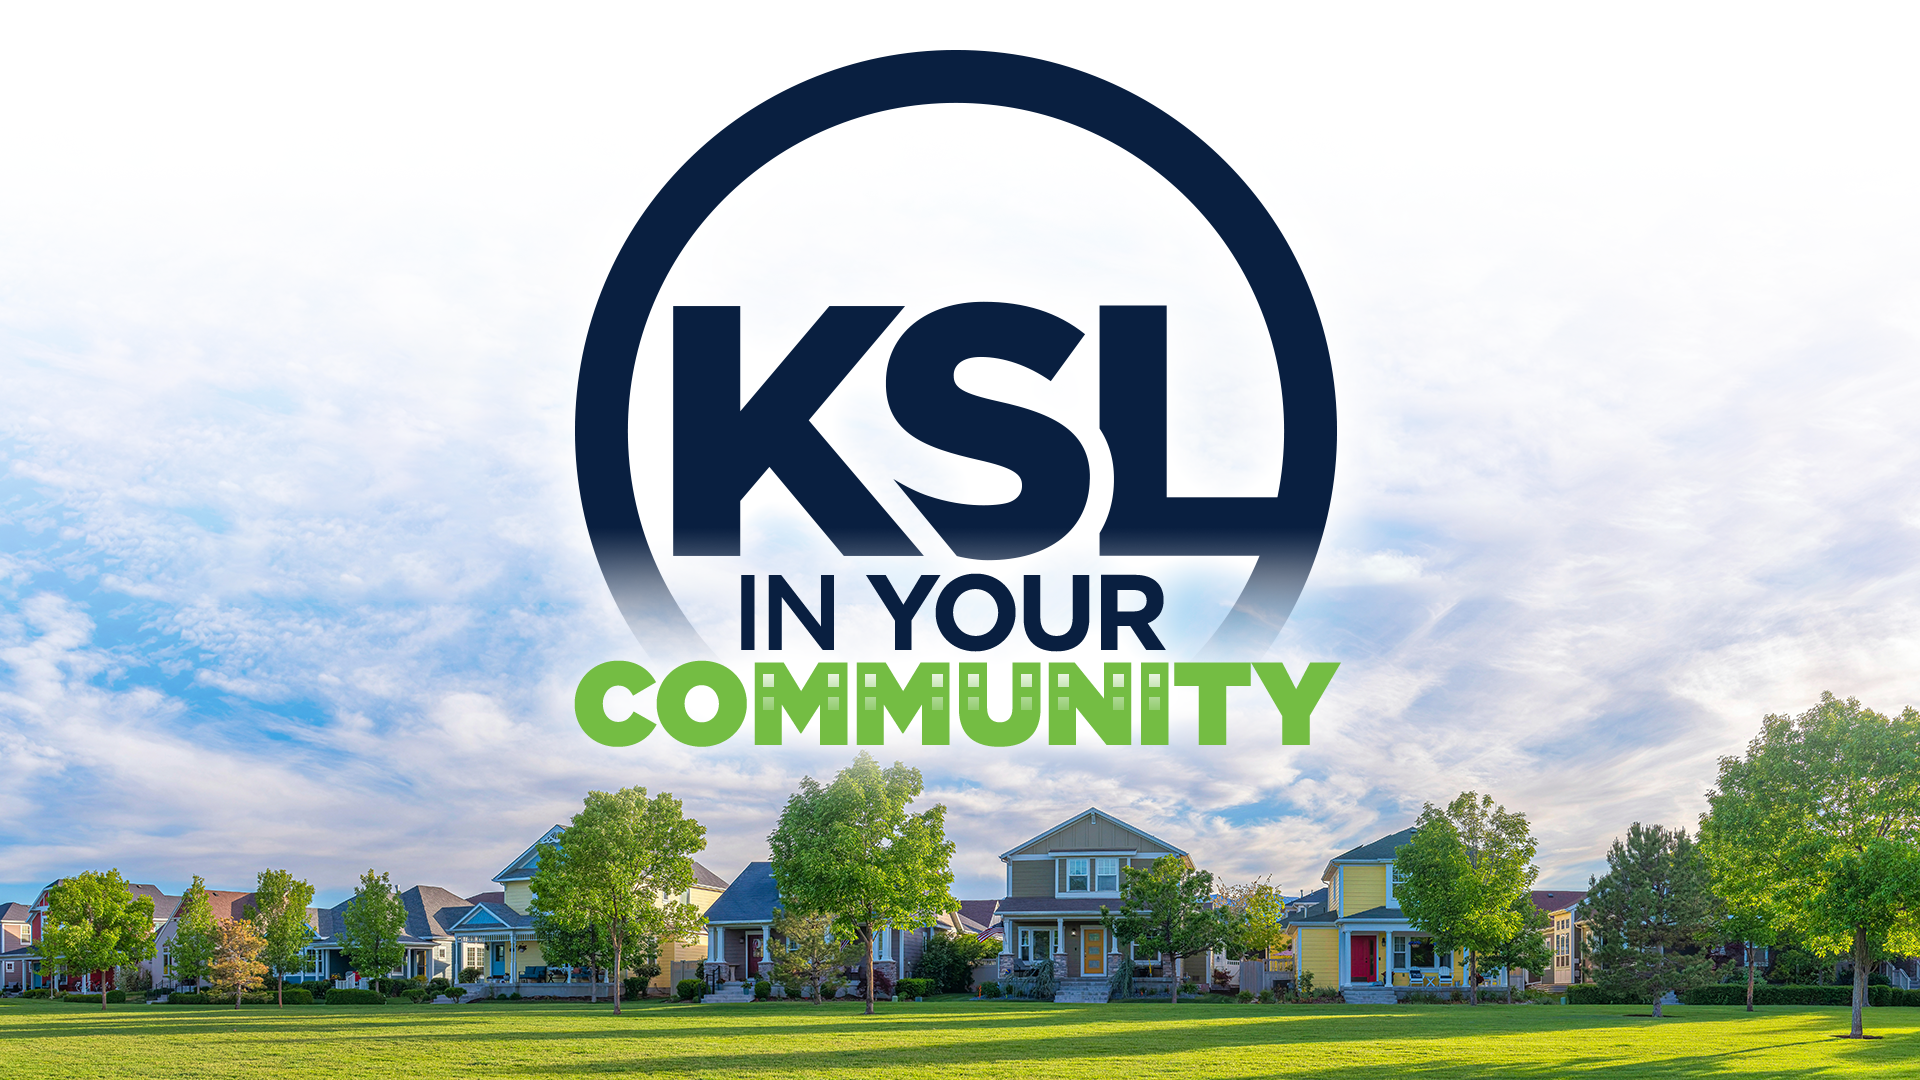 You can see KSL in your community through our new campaign to tell your neighborhood's stories...